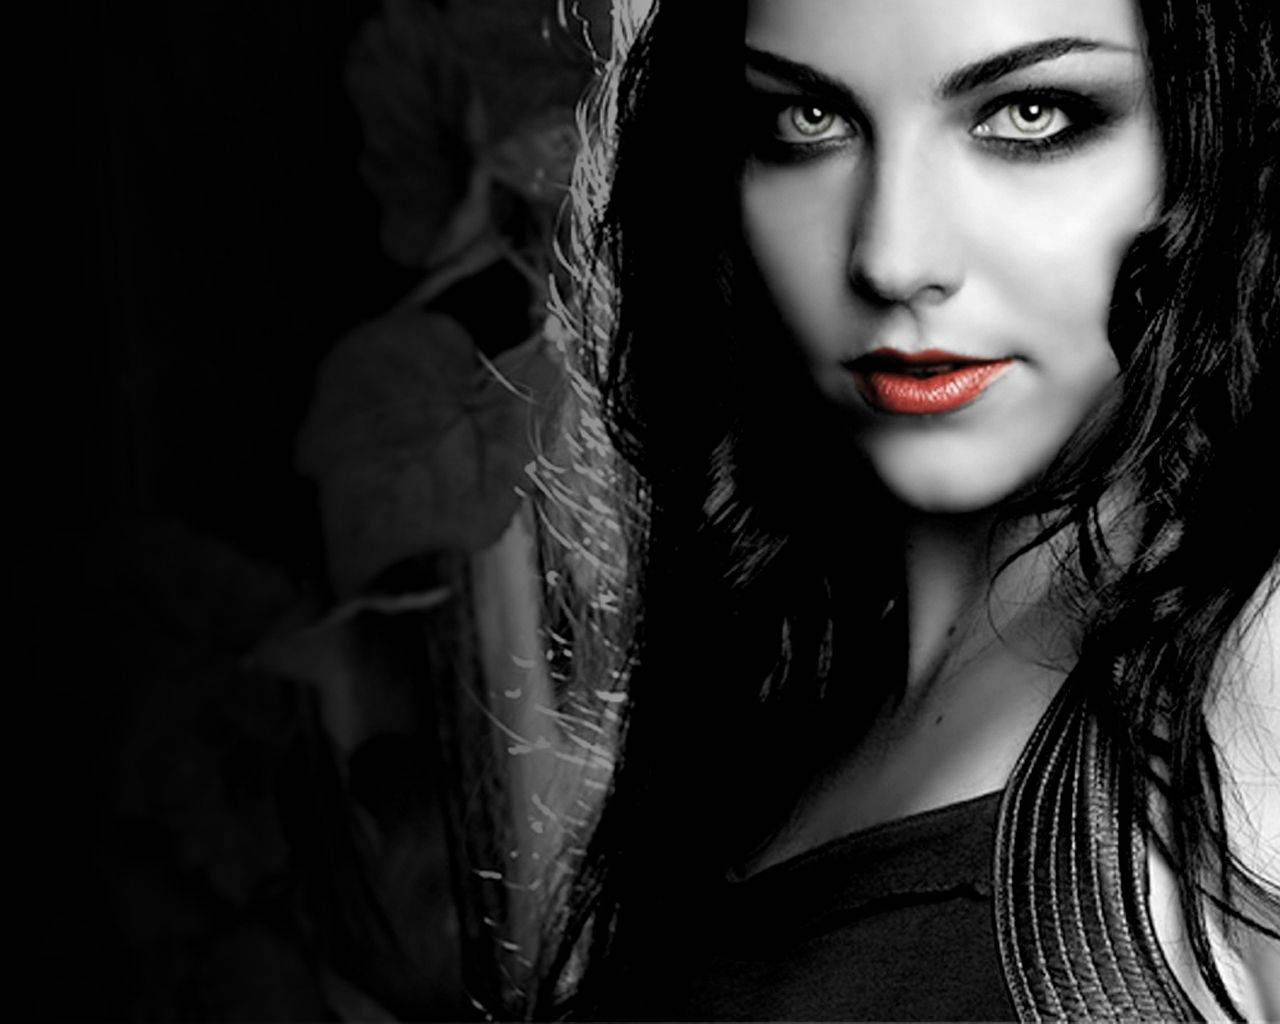 Let love take control and give into temptation - Vampire Evanescence Wallpaper